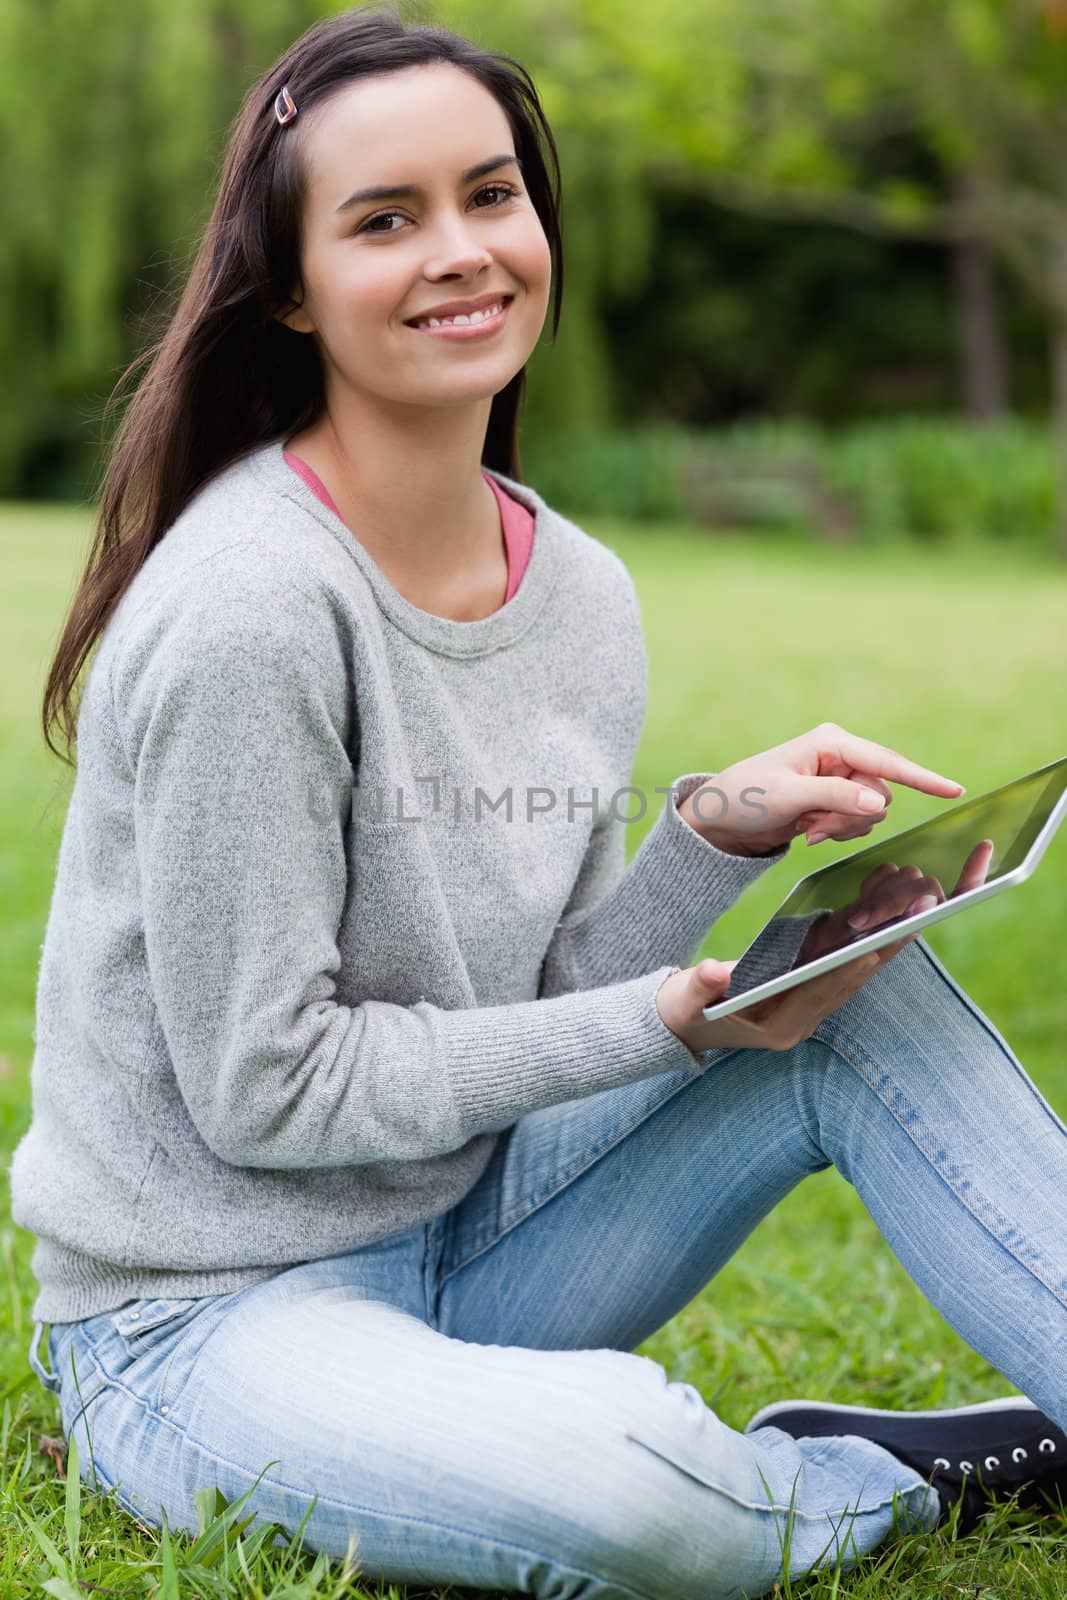 Young smiling girl looking straight at the camera while using her tablet computer